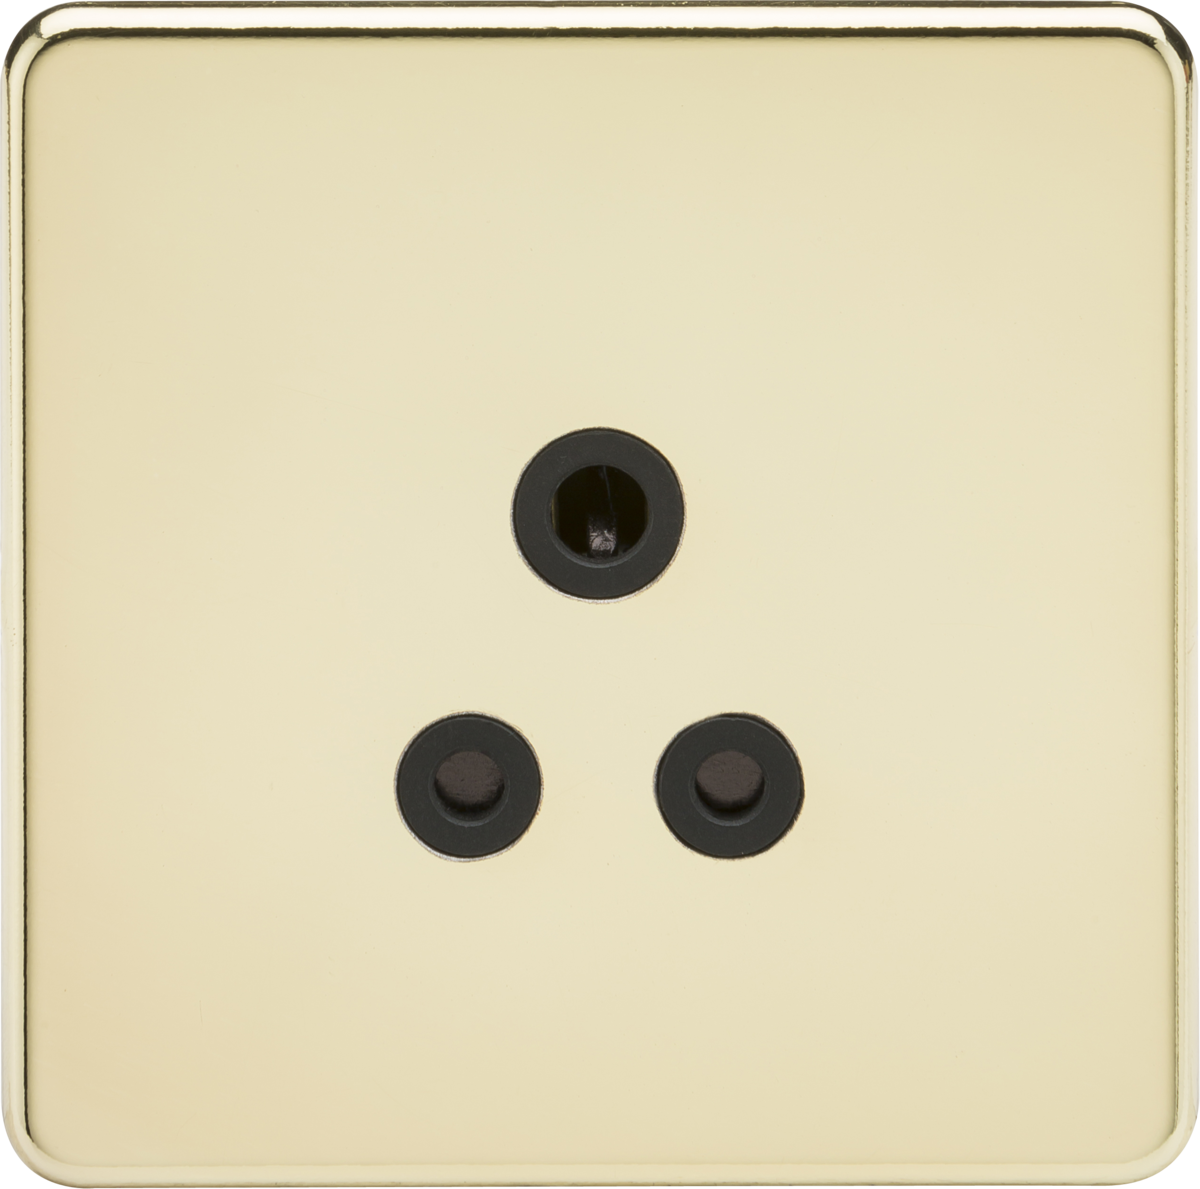 Screwless 5A Unswitched Socket - Polished Brass with Black Insert